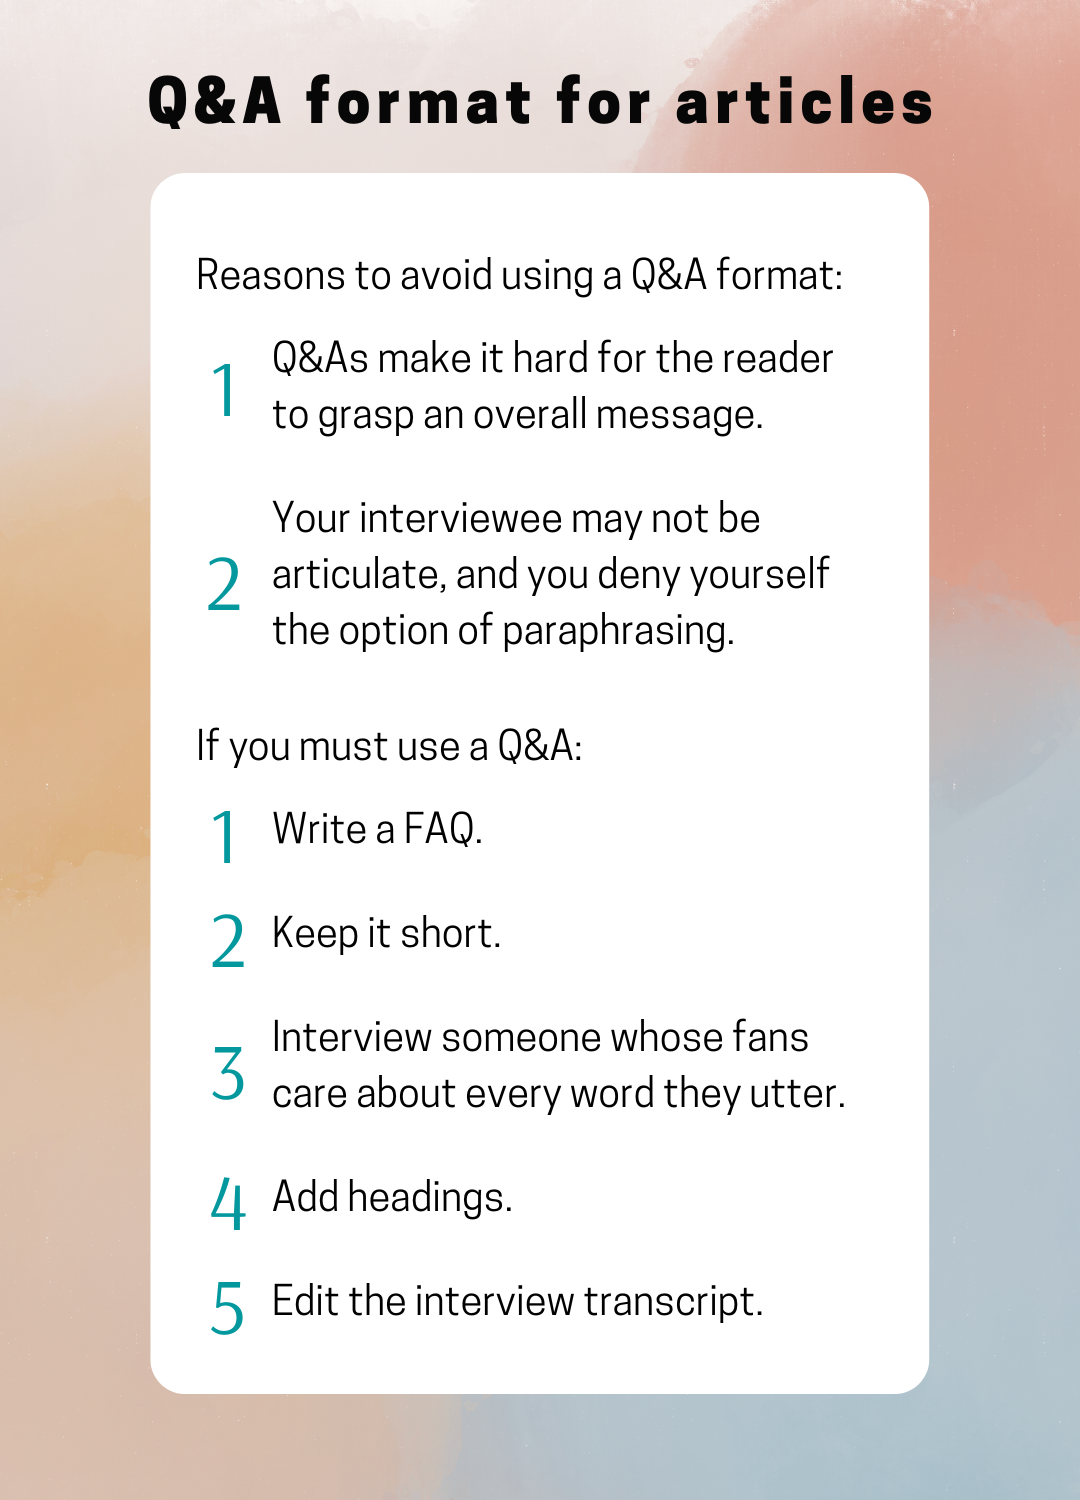 Q&A format for articles good or bad infographic